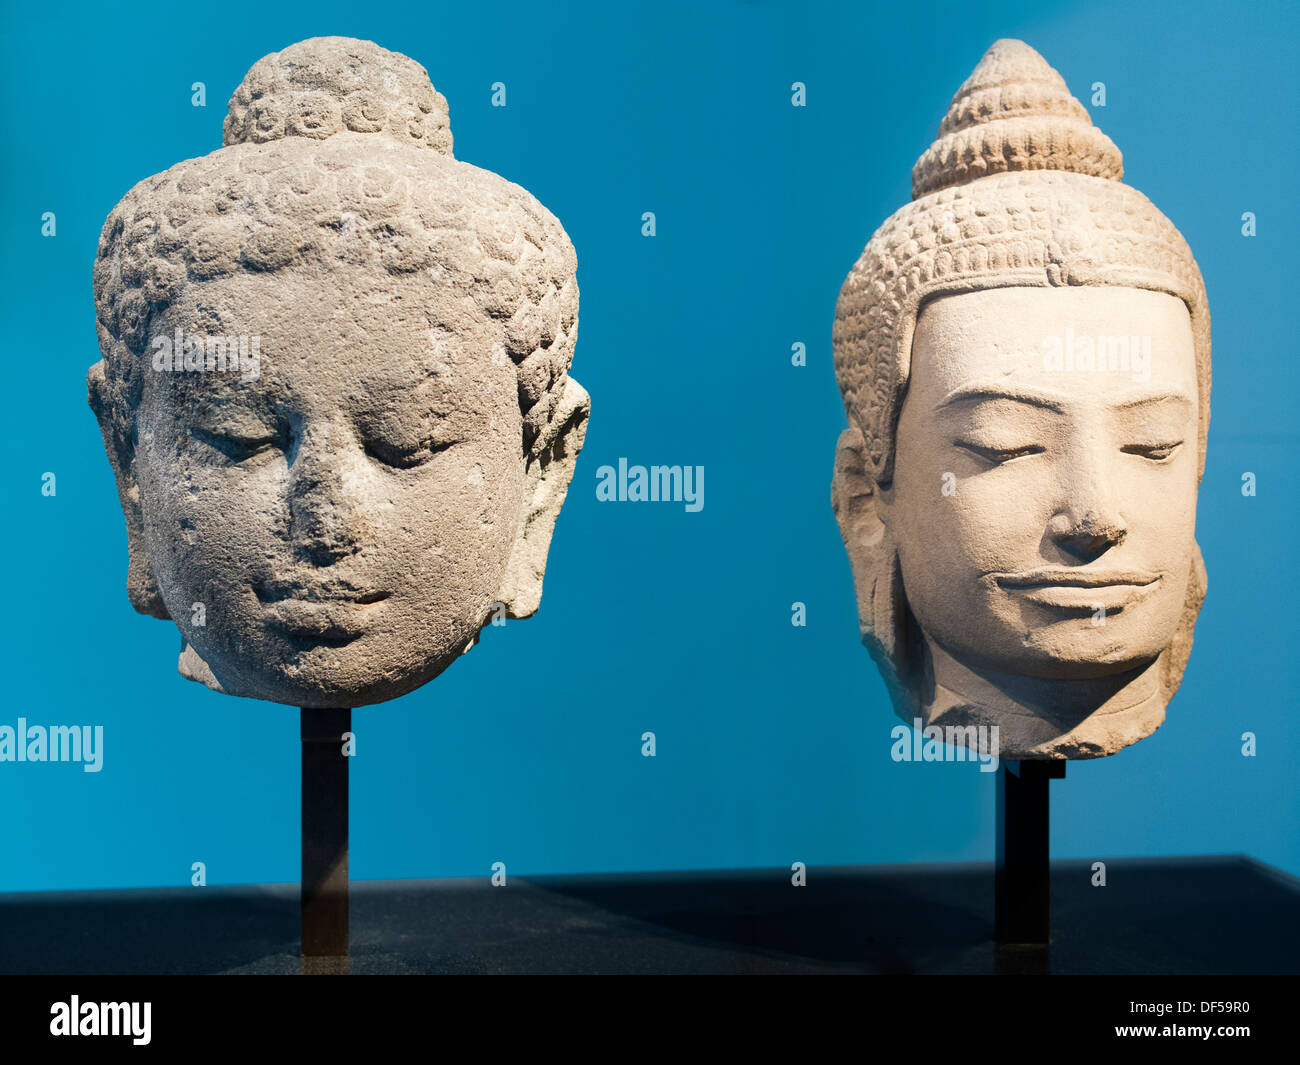 The Victoria and Albert Museum, London - two Buddha heads 2 Stock Photo